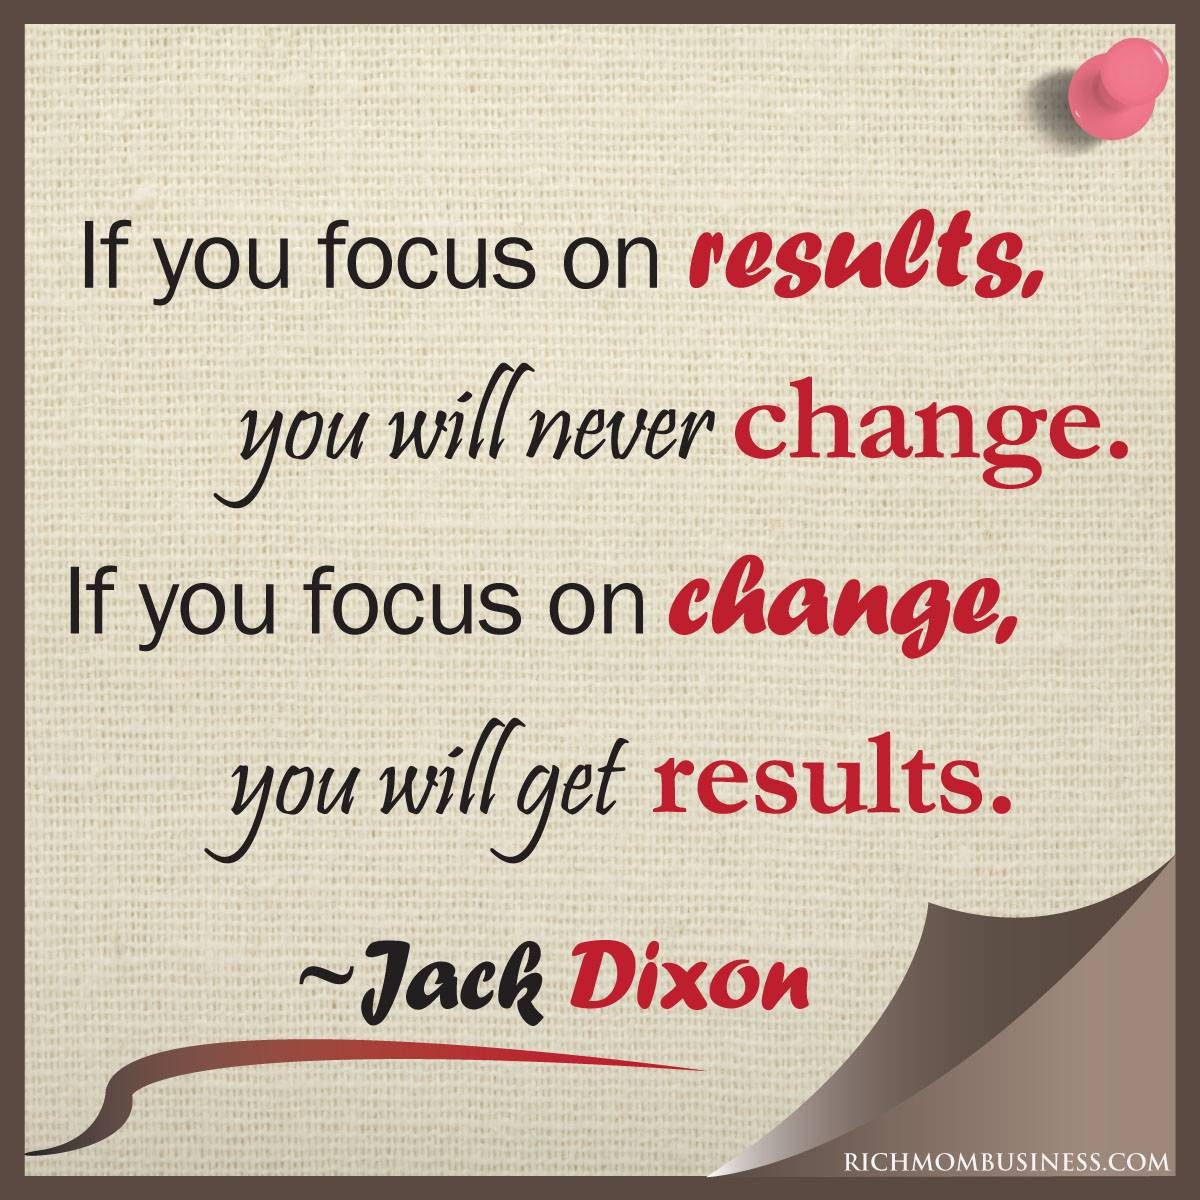 Motivational Quote For Change
 1000 images about Organisational change on Pinterest